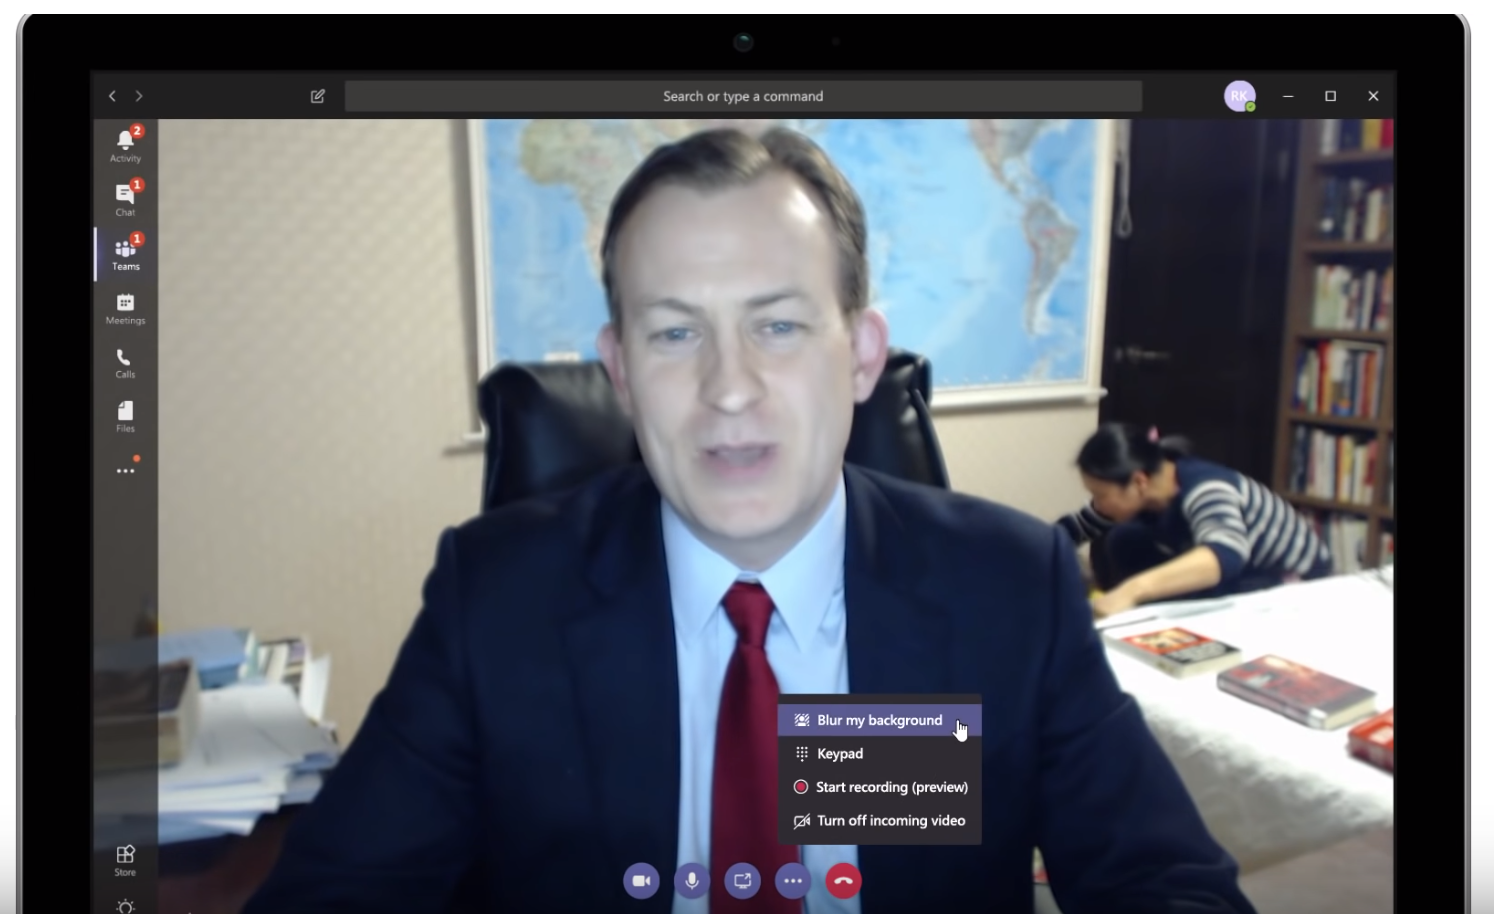 Man on a conference call with children in background, using the background blur functionality in Microsoft Teams.